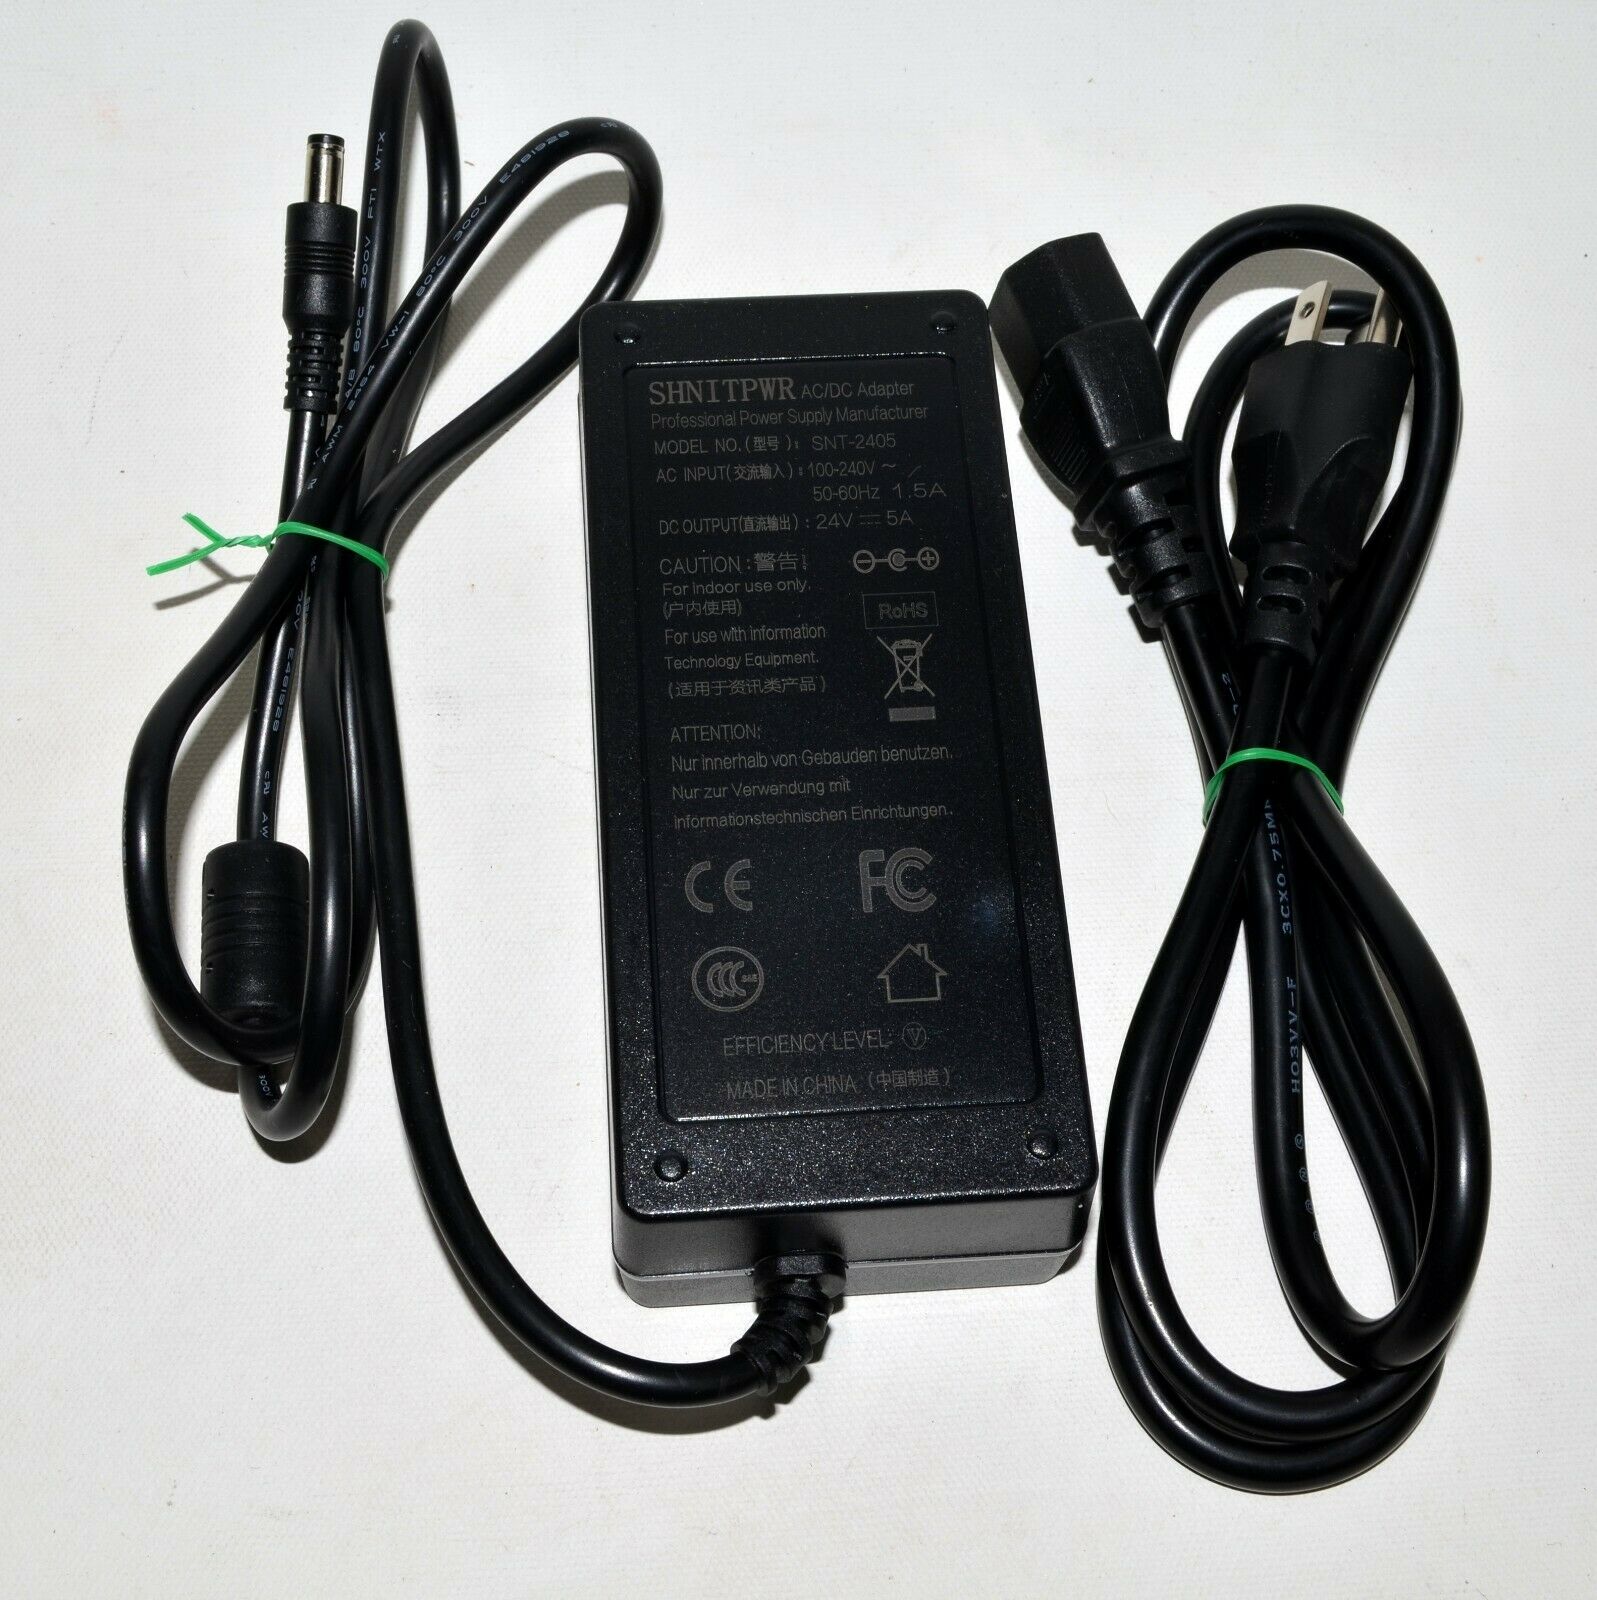 Shnitpwr ACDC Power Adapter Supply SNT-2405 24V 5A Compatible Brand: Universal Brand: Shnitpwr